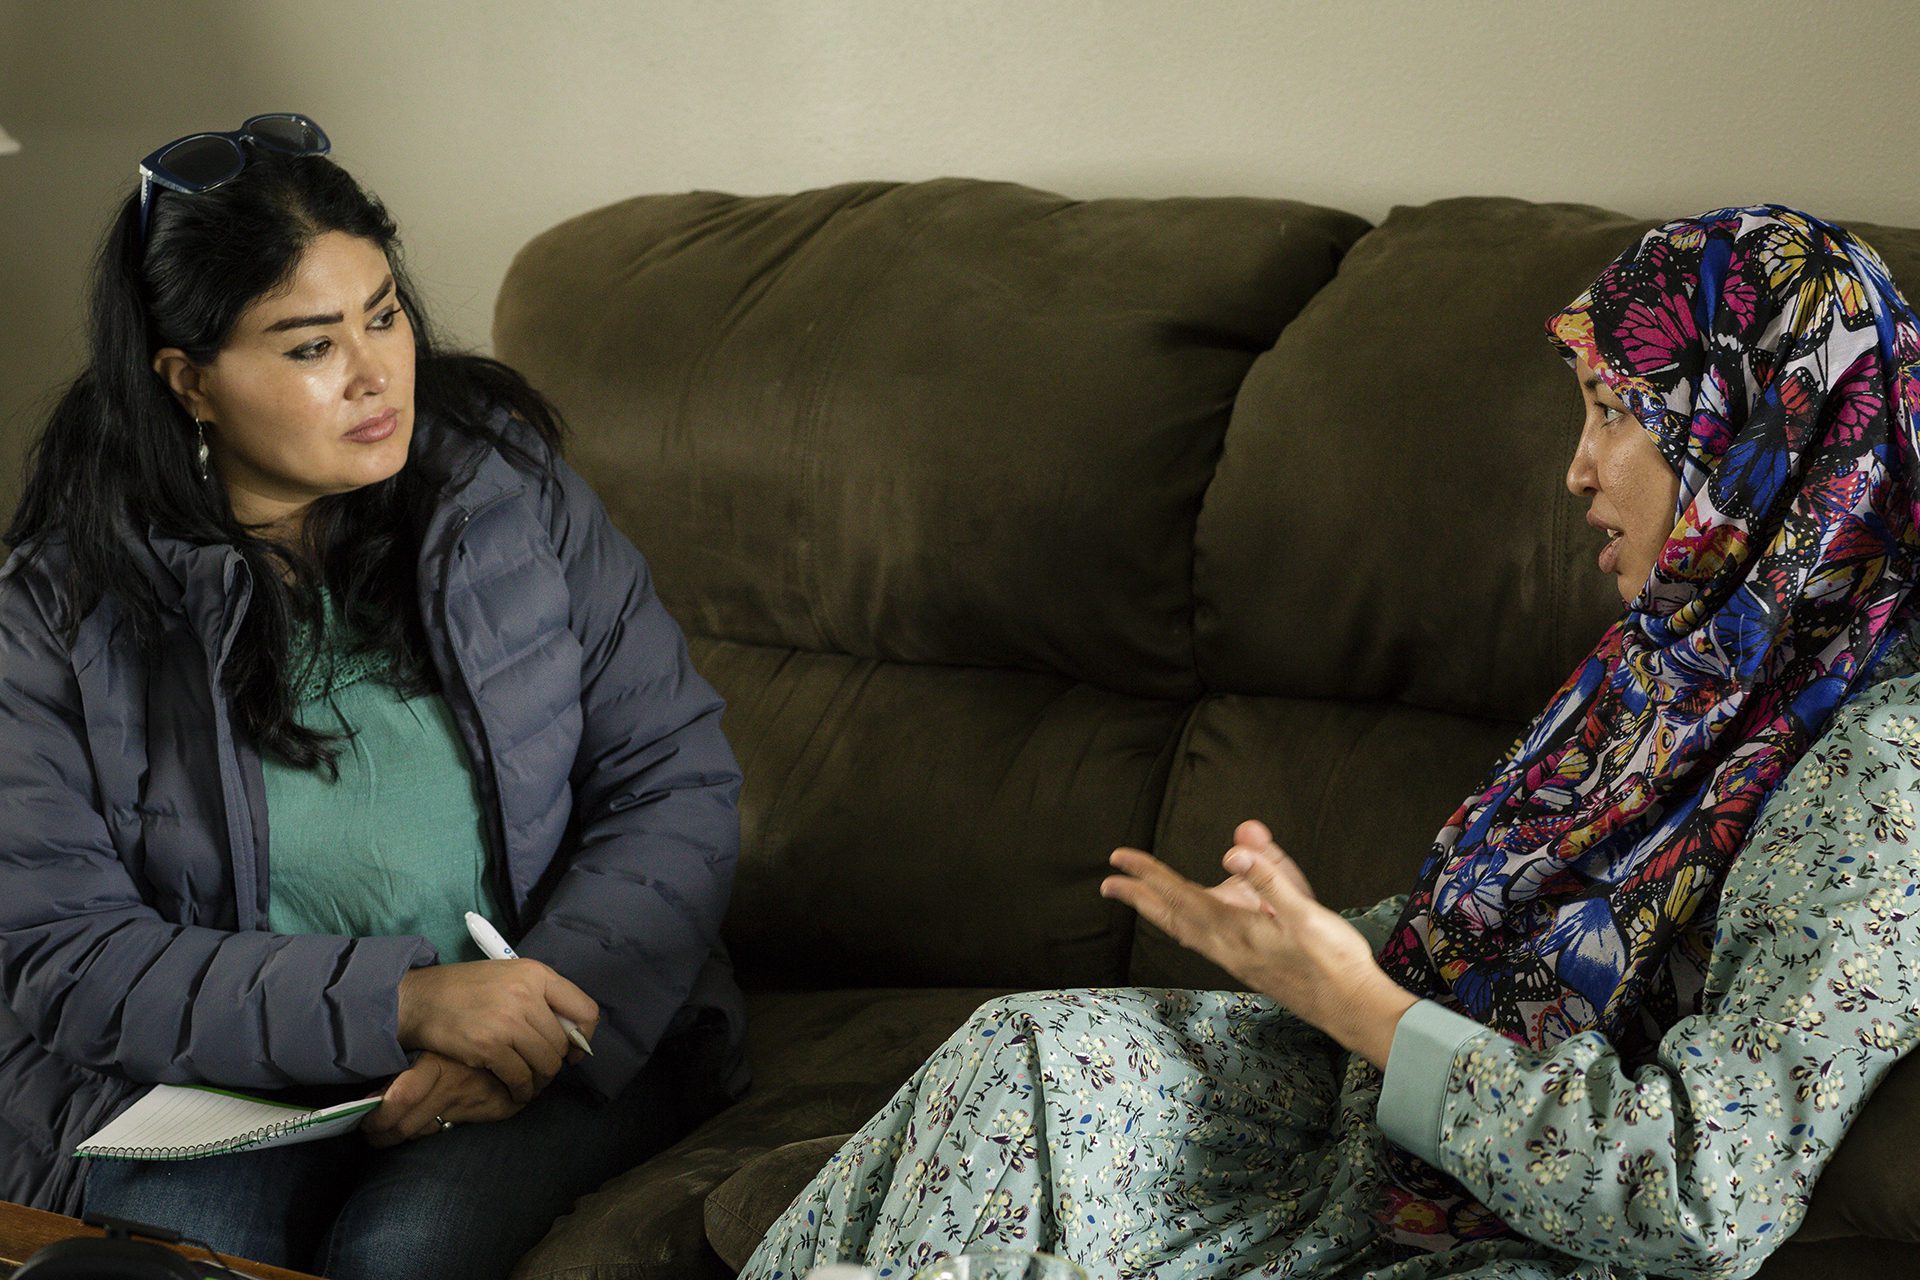 Saleha Soadat interviews former Afghan district governor Salima Mazari on a couch